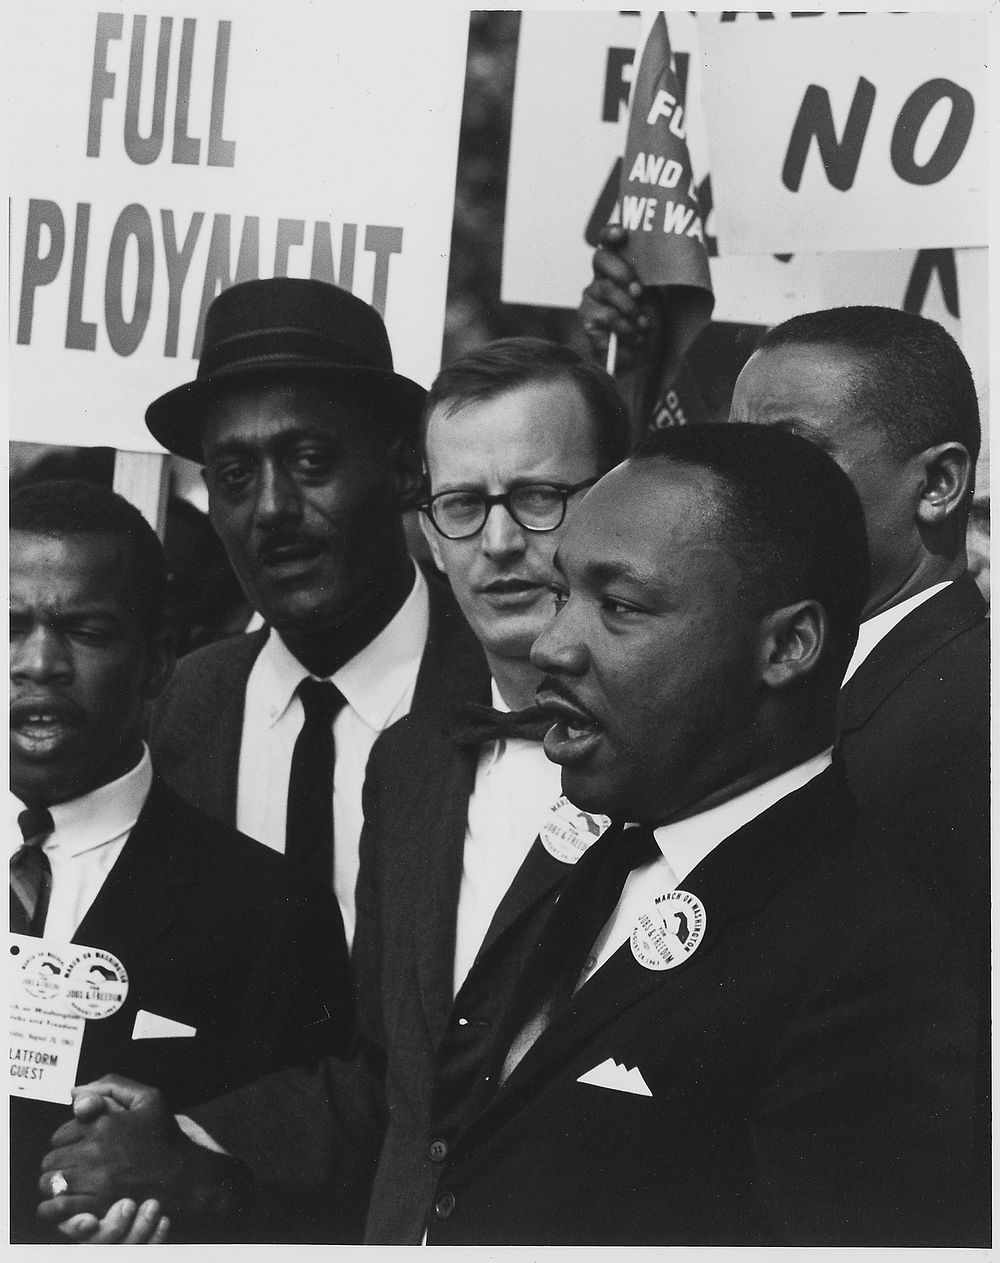 Martin Luther King, Civil Rights March on Washington, D.C. Original public domain image from Flickr